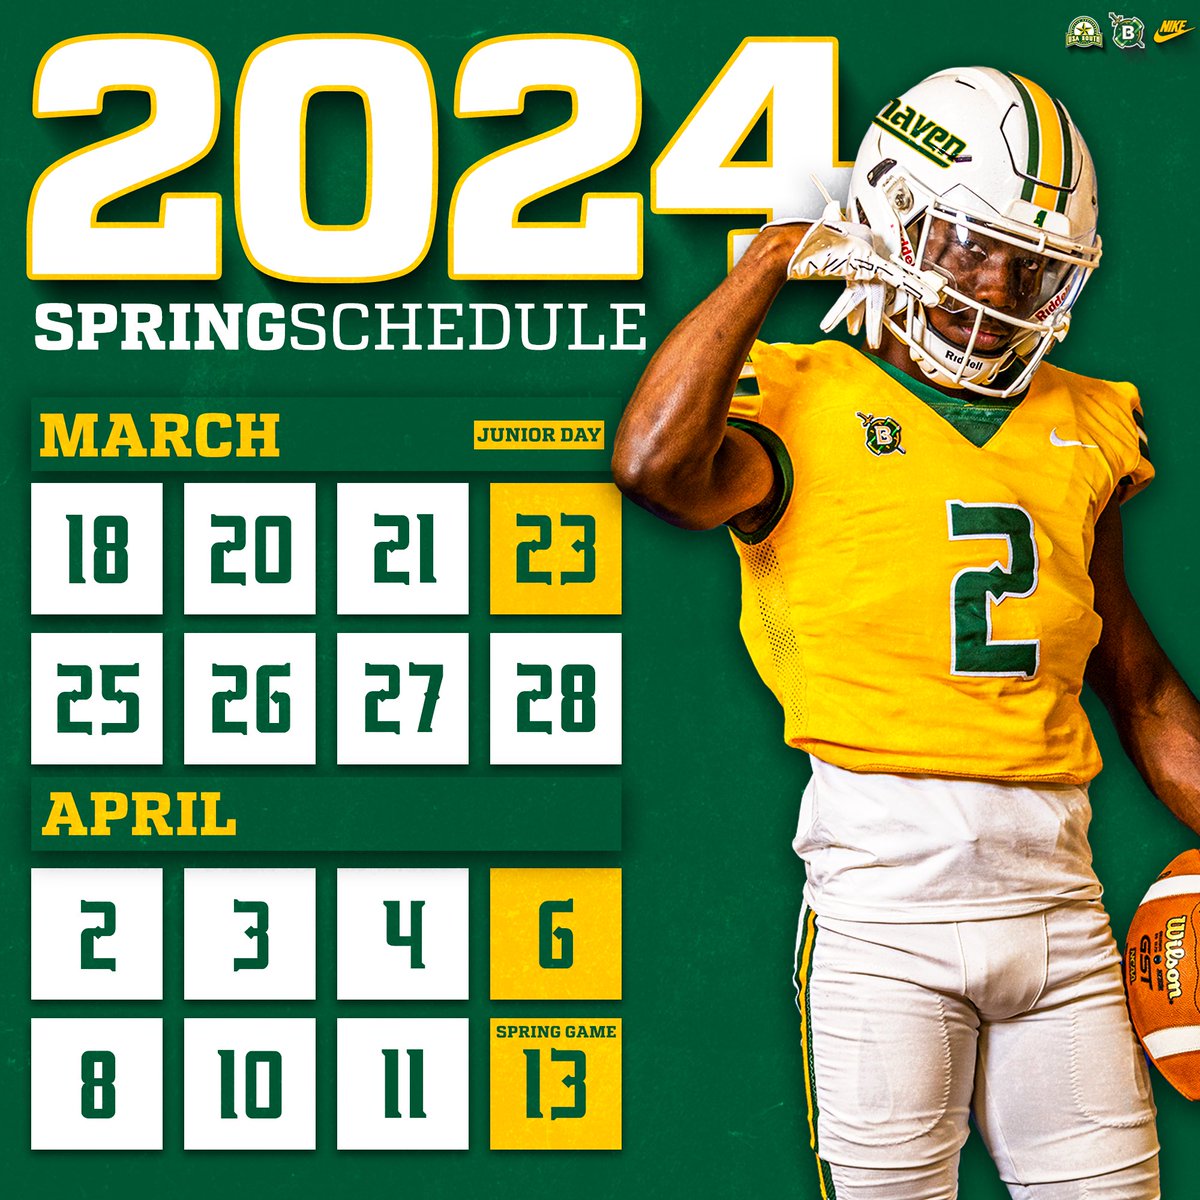 We are 2 weeks away from our first Junior Day for the class of 2025. The foundation is strong with @BelhavenFB, come experience it for yourself. #FIGHT